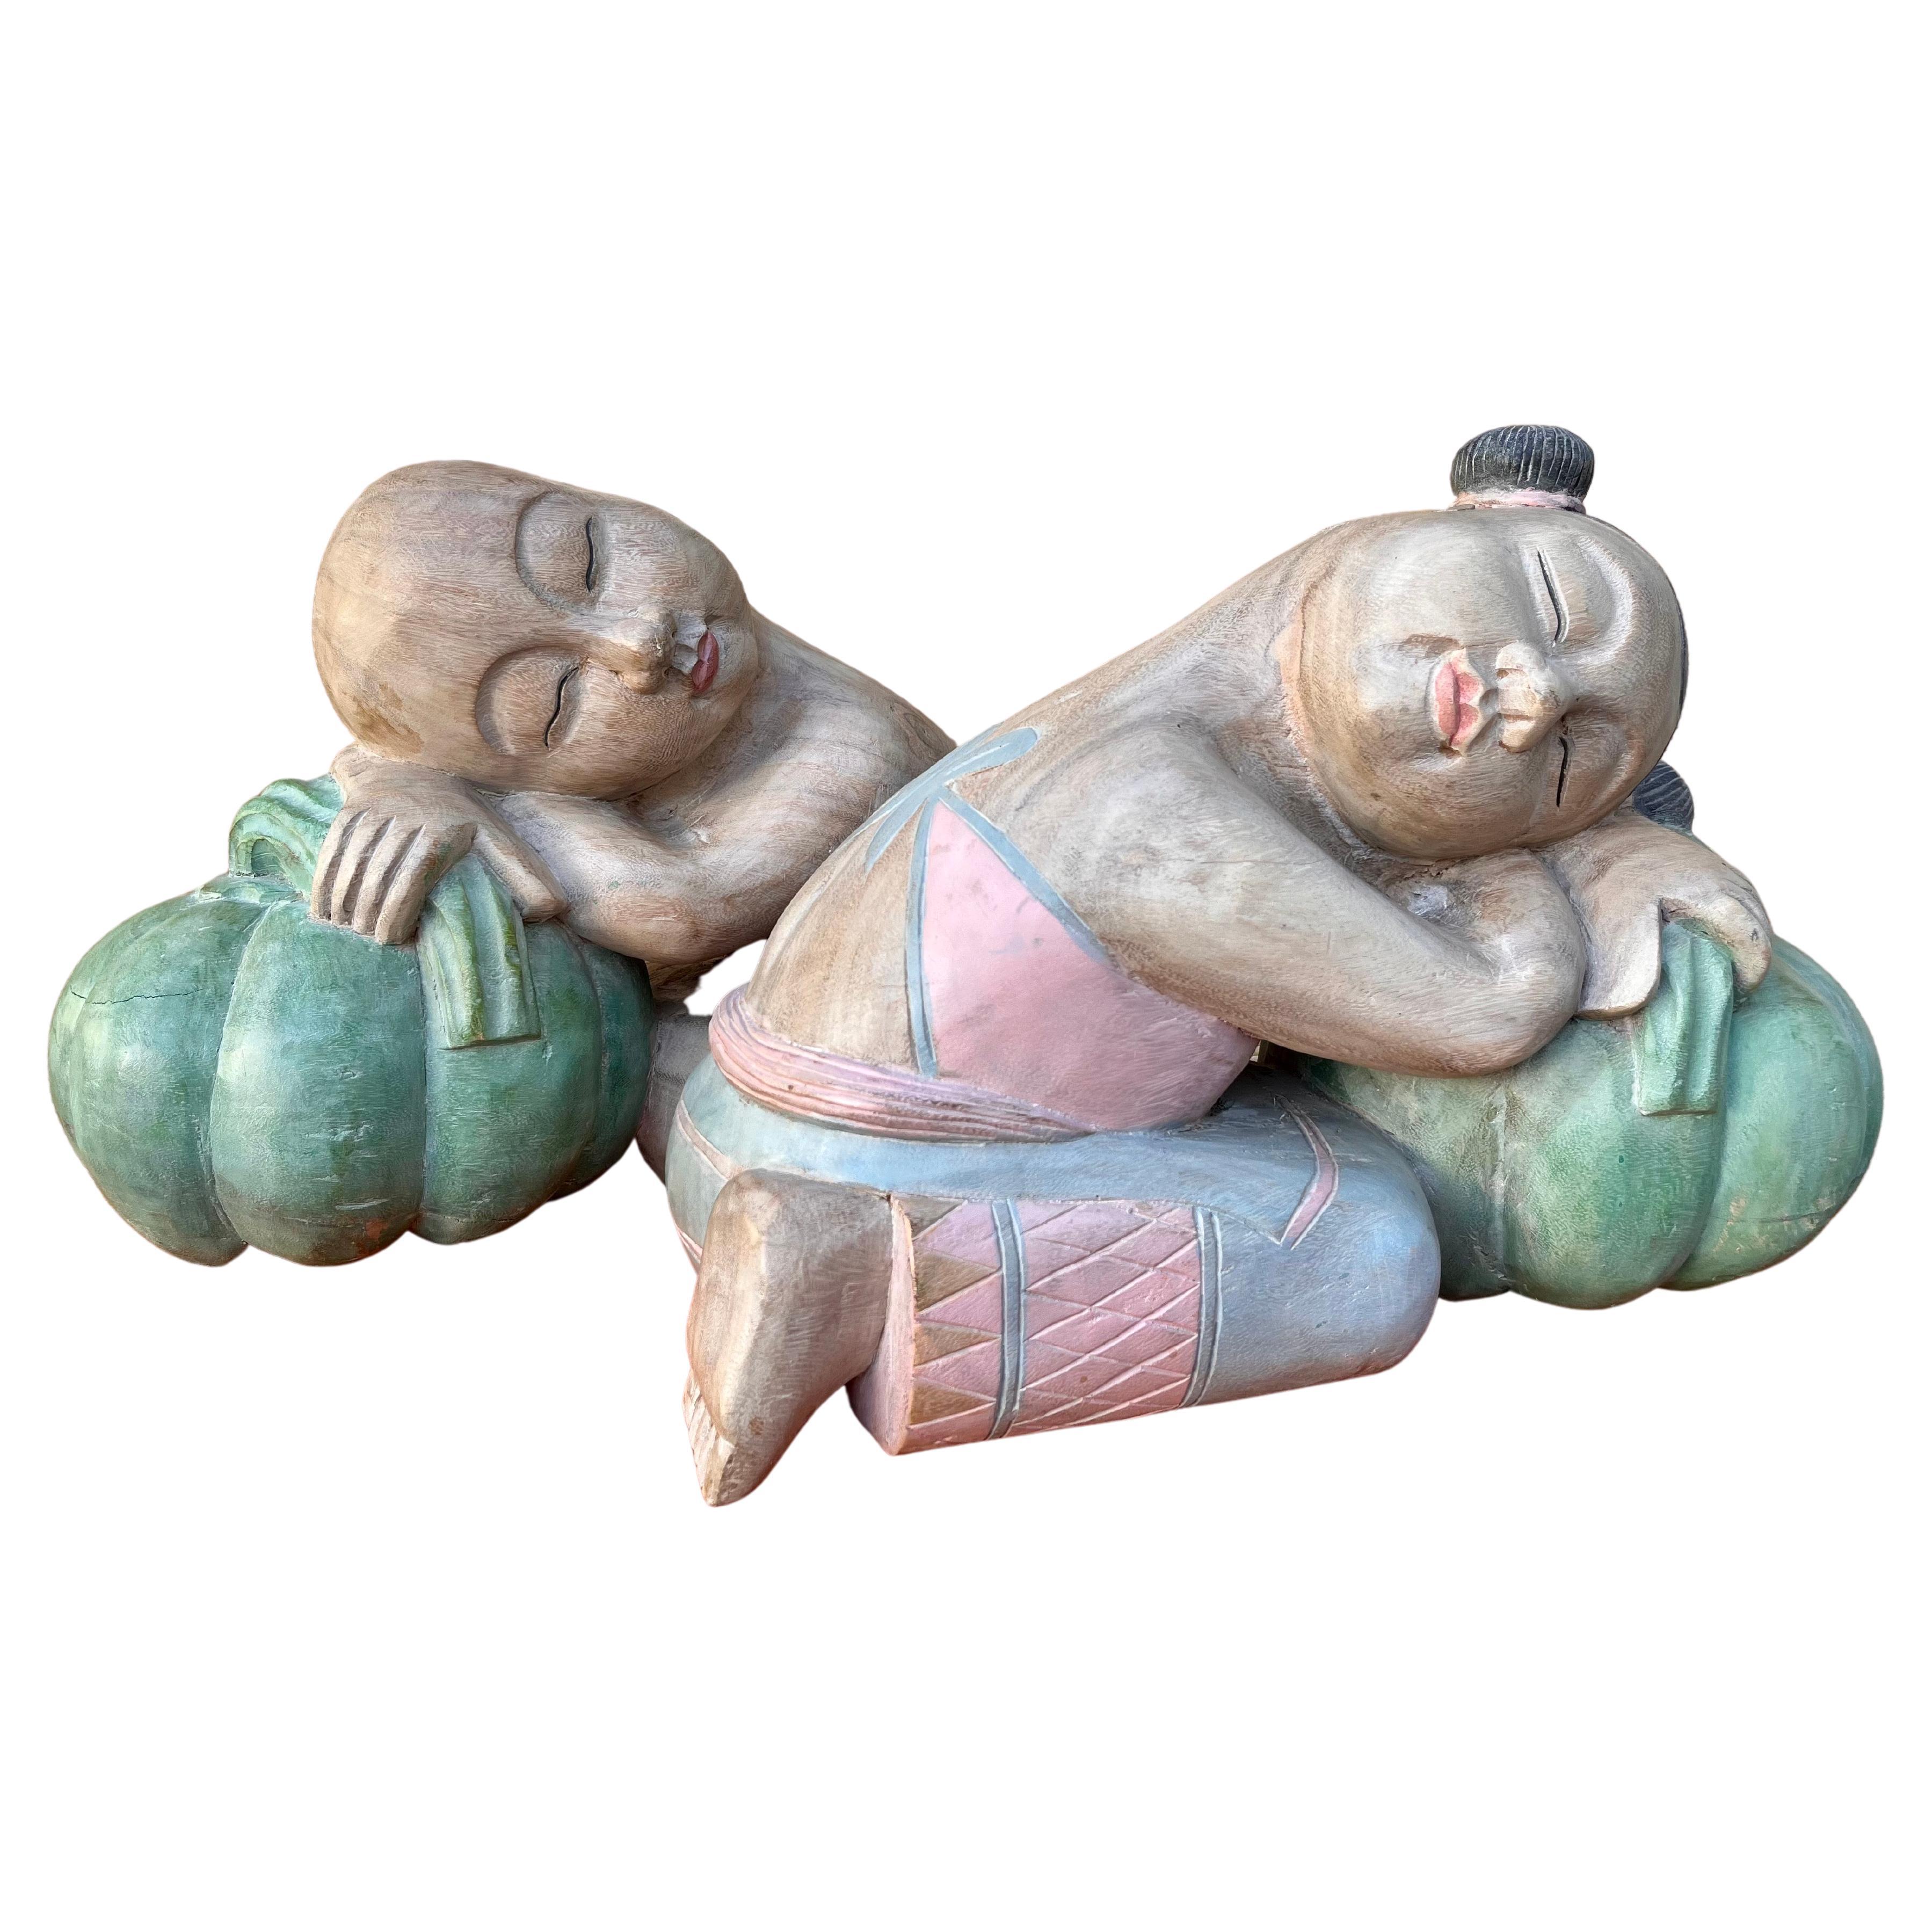 Large Asian Carved Wood Sculptures of Good Luck Children Sleeping on Melons